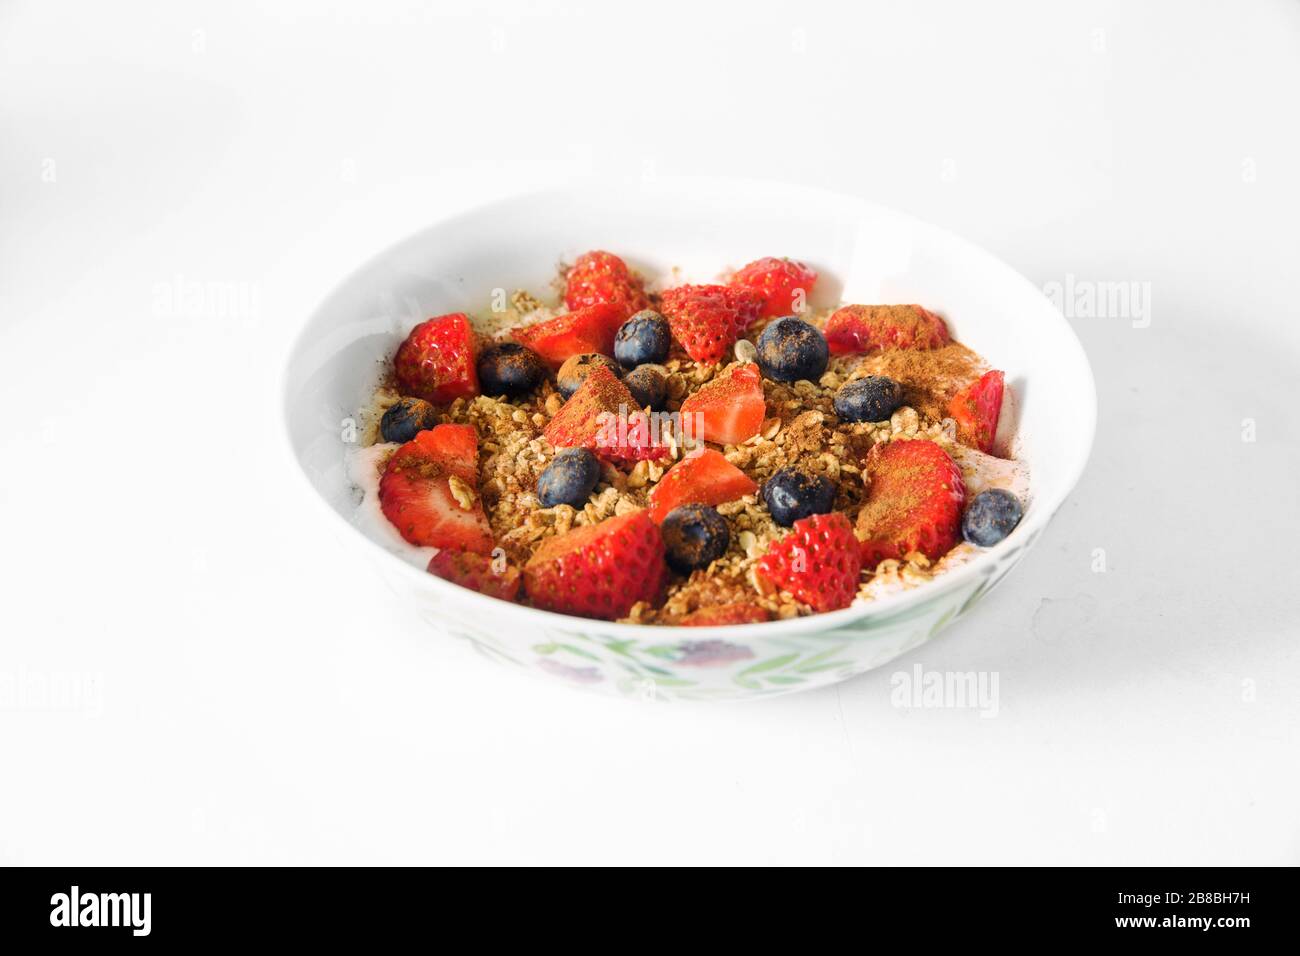 A Healthy Happy Oatmeal Breakfast for a time of isolation. A Bowl of oats, granola, strawberry, blueberries, yogurt, with white bowl, white background Stock Photo